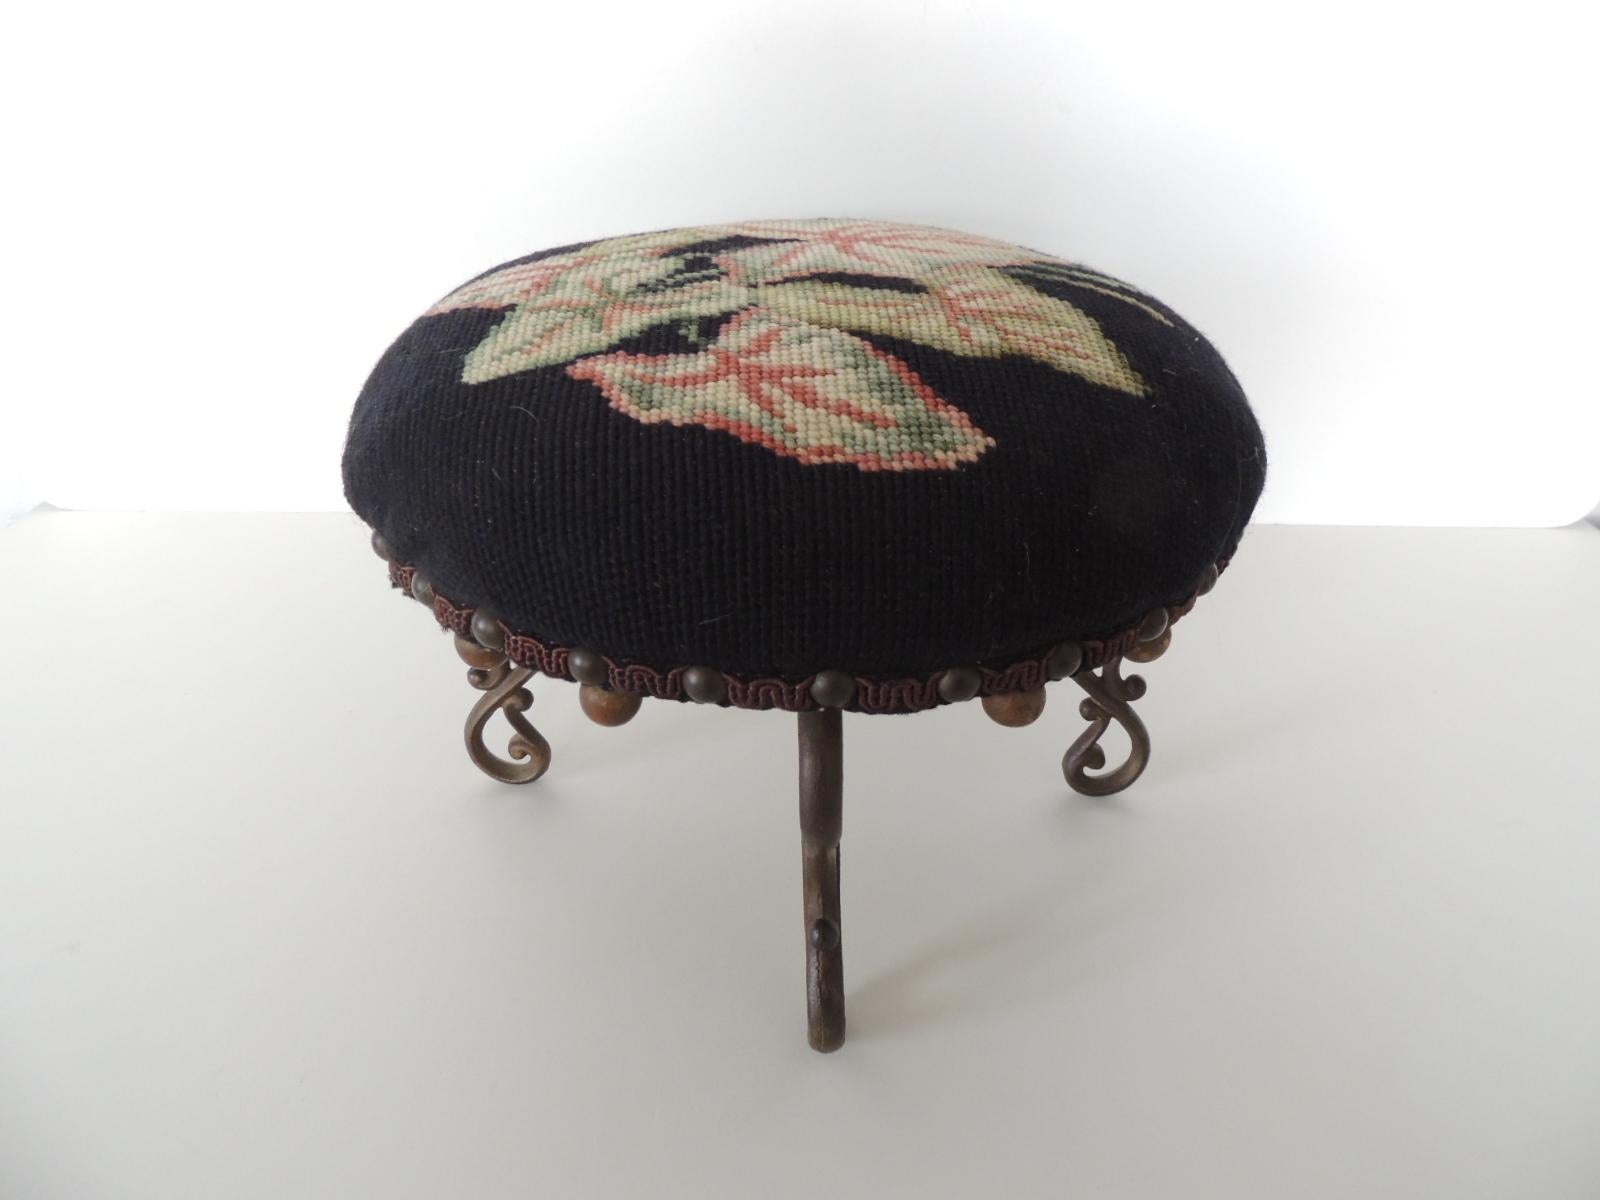 Vintage round tapestry footstool with brass legs.
Scrolled design brass legs with small wooden balls underside,
Depicting Caladium 